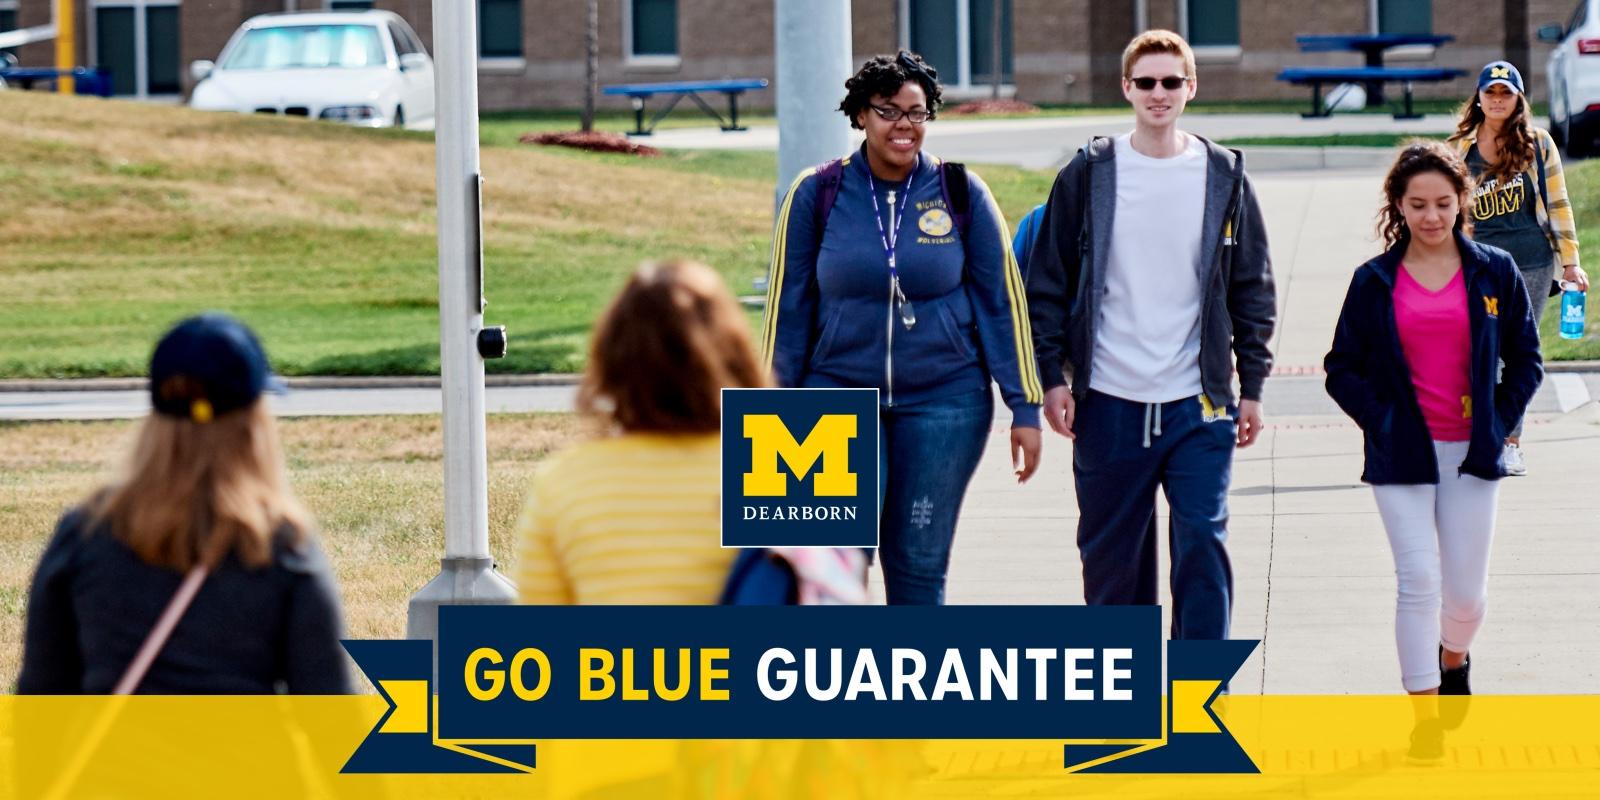 Students walking on campus wtih Go Blue Guarantee banner